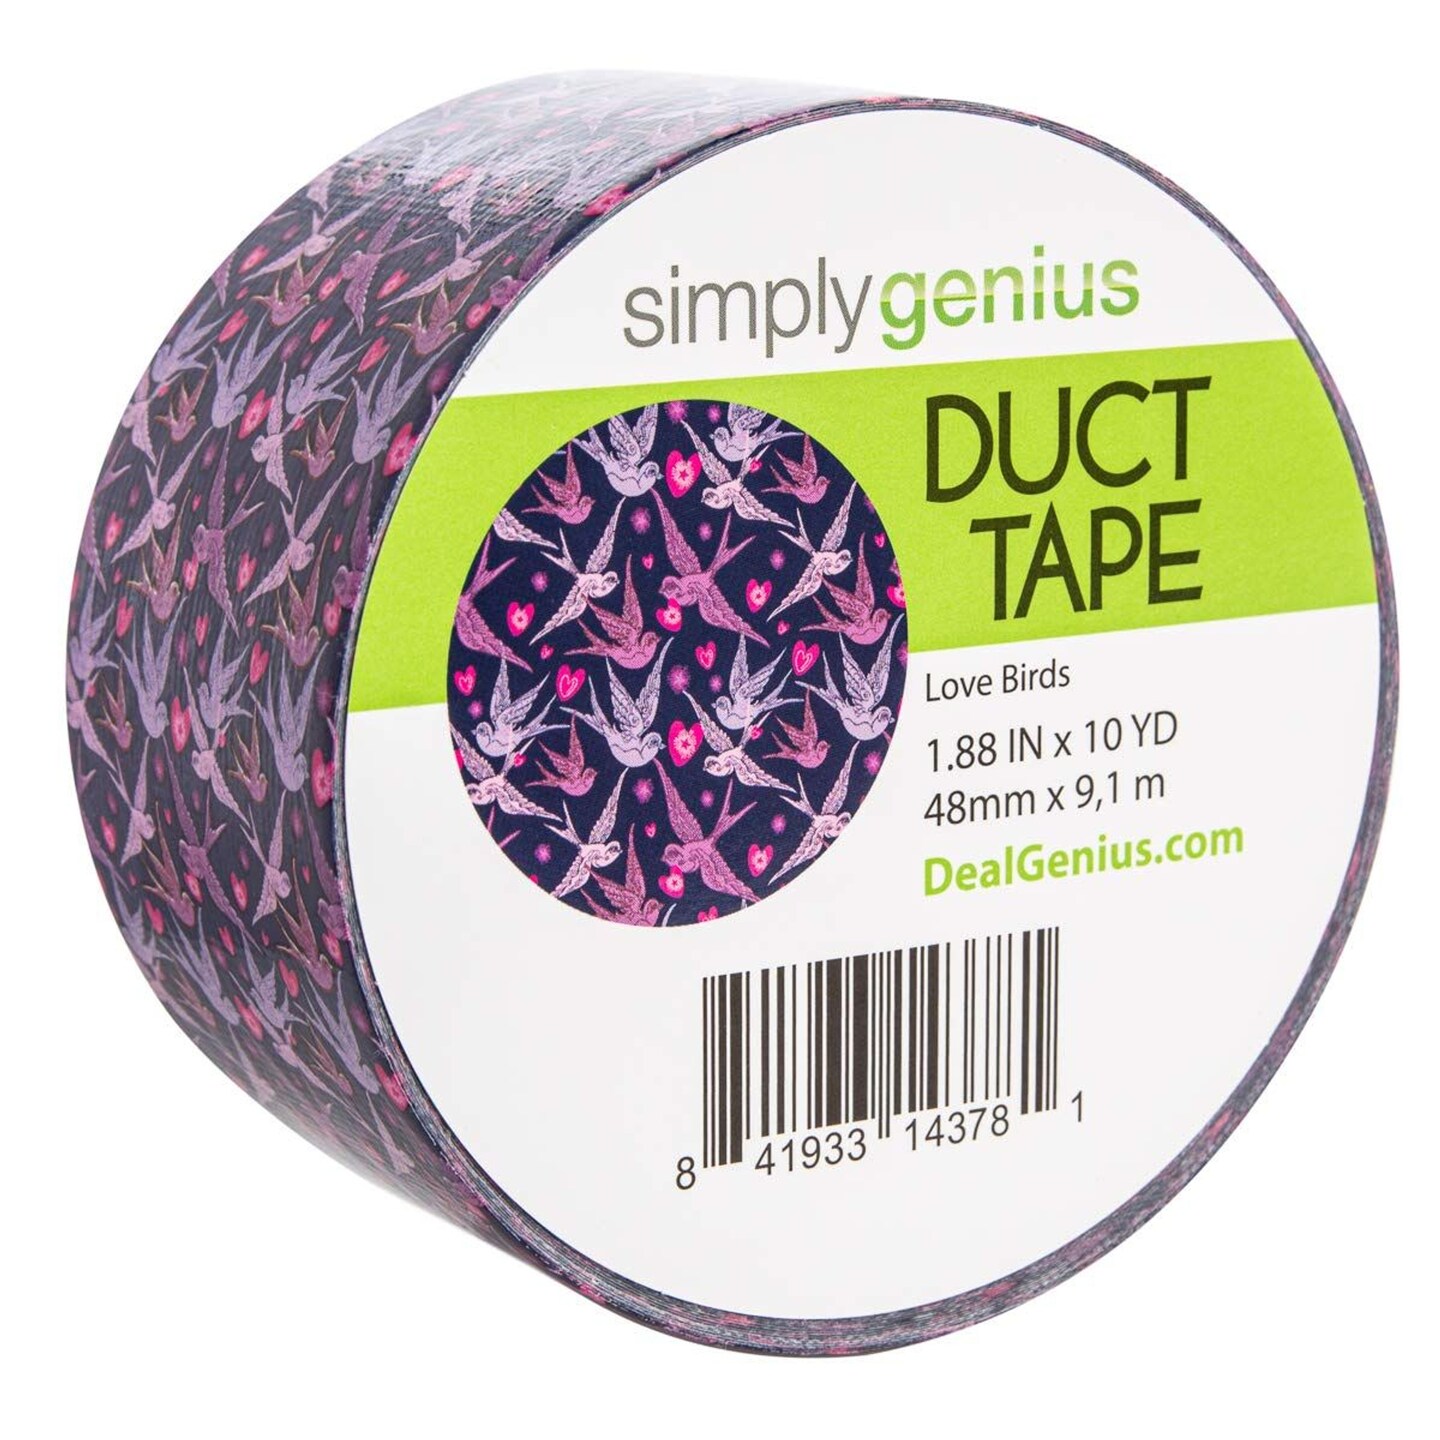 Simply Genius Pattern Duct Tape Heavy Duty - Craft Supplies for Kids &#x26; Adults - Colored Duct Tape - Single Roll 1.8 in x 10 yards - Colorful Tape for DIY, Craft &#x26; Home Improvement (Love Birds)